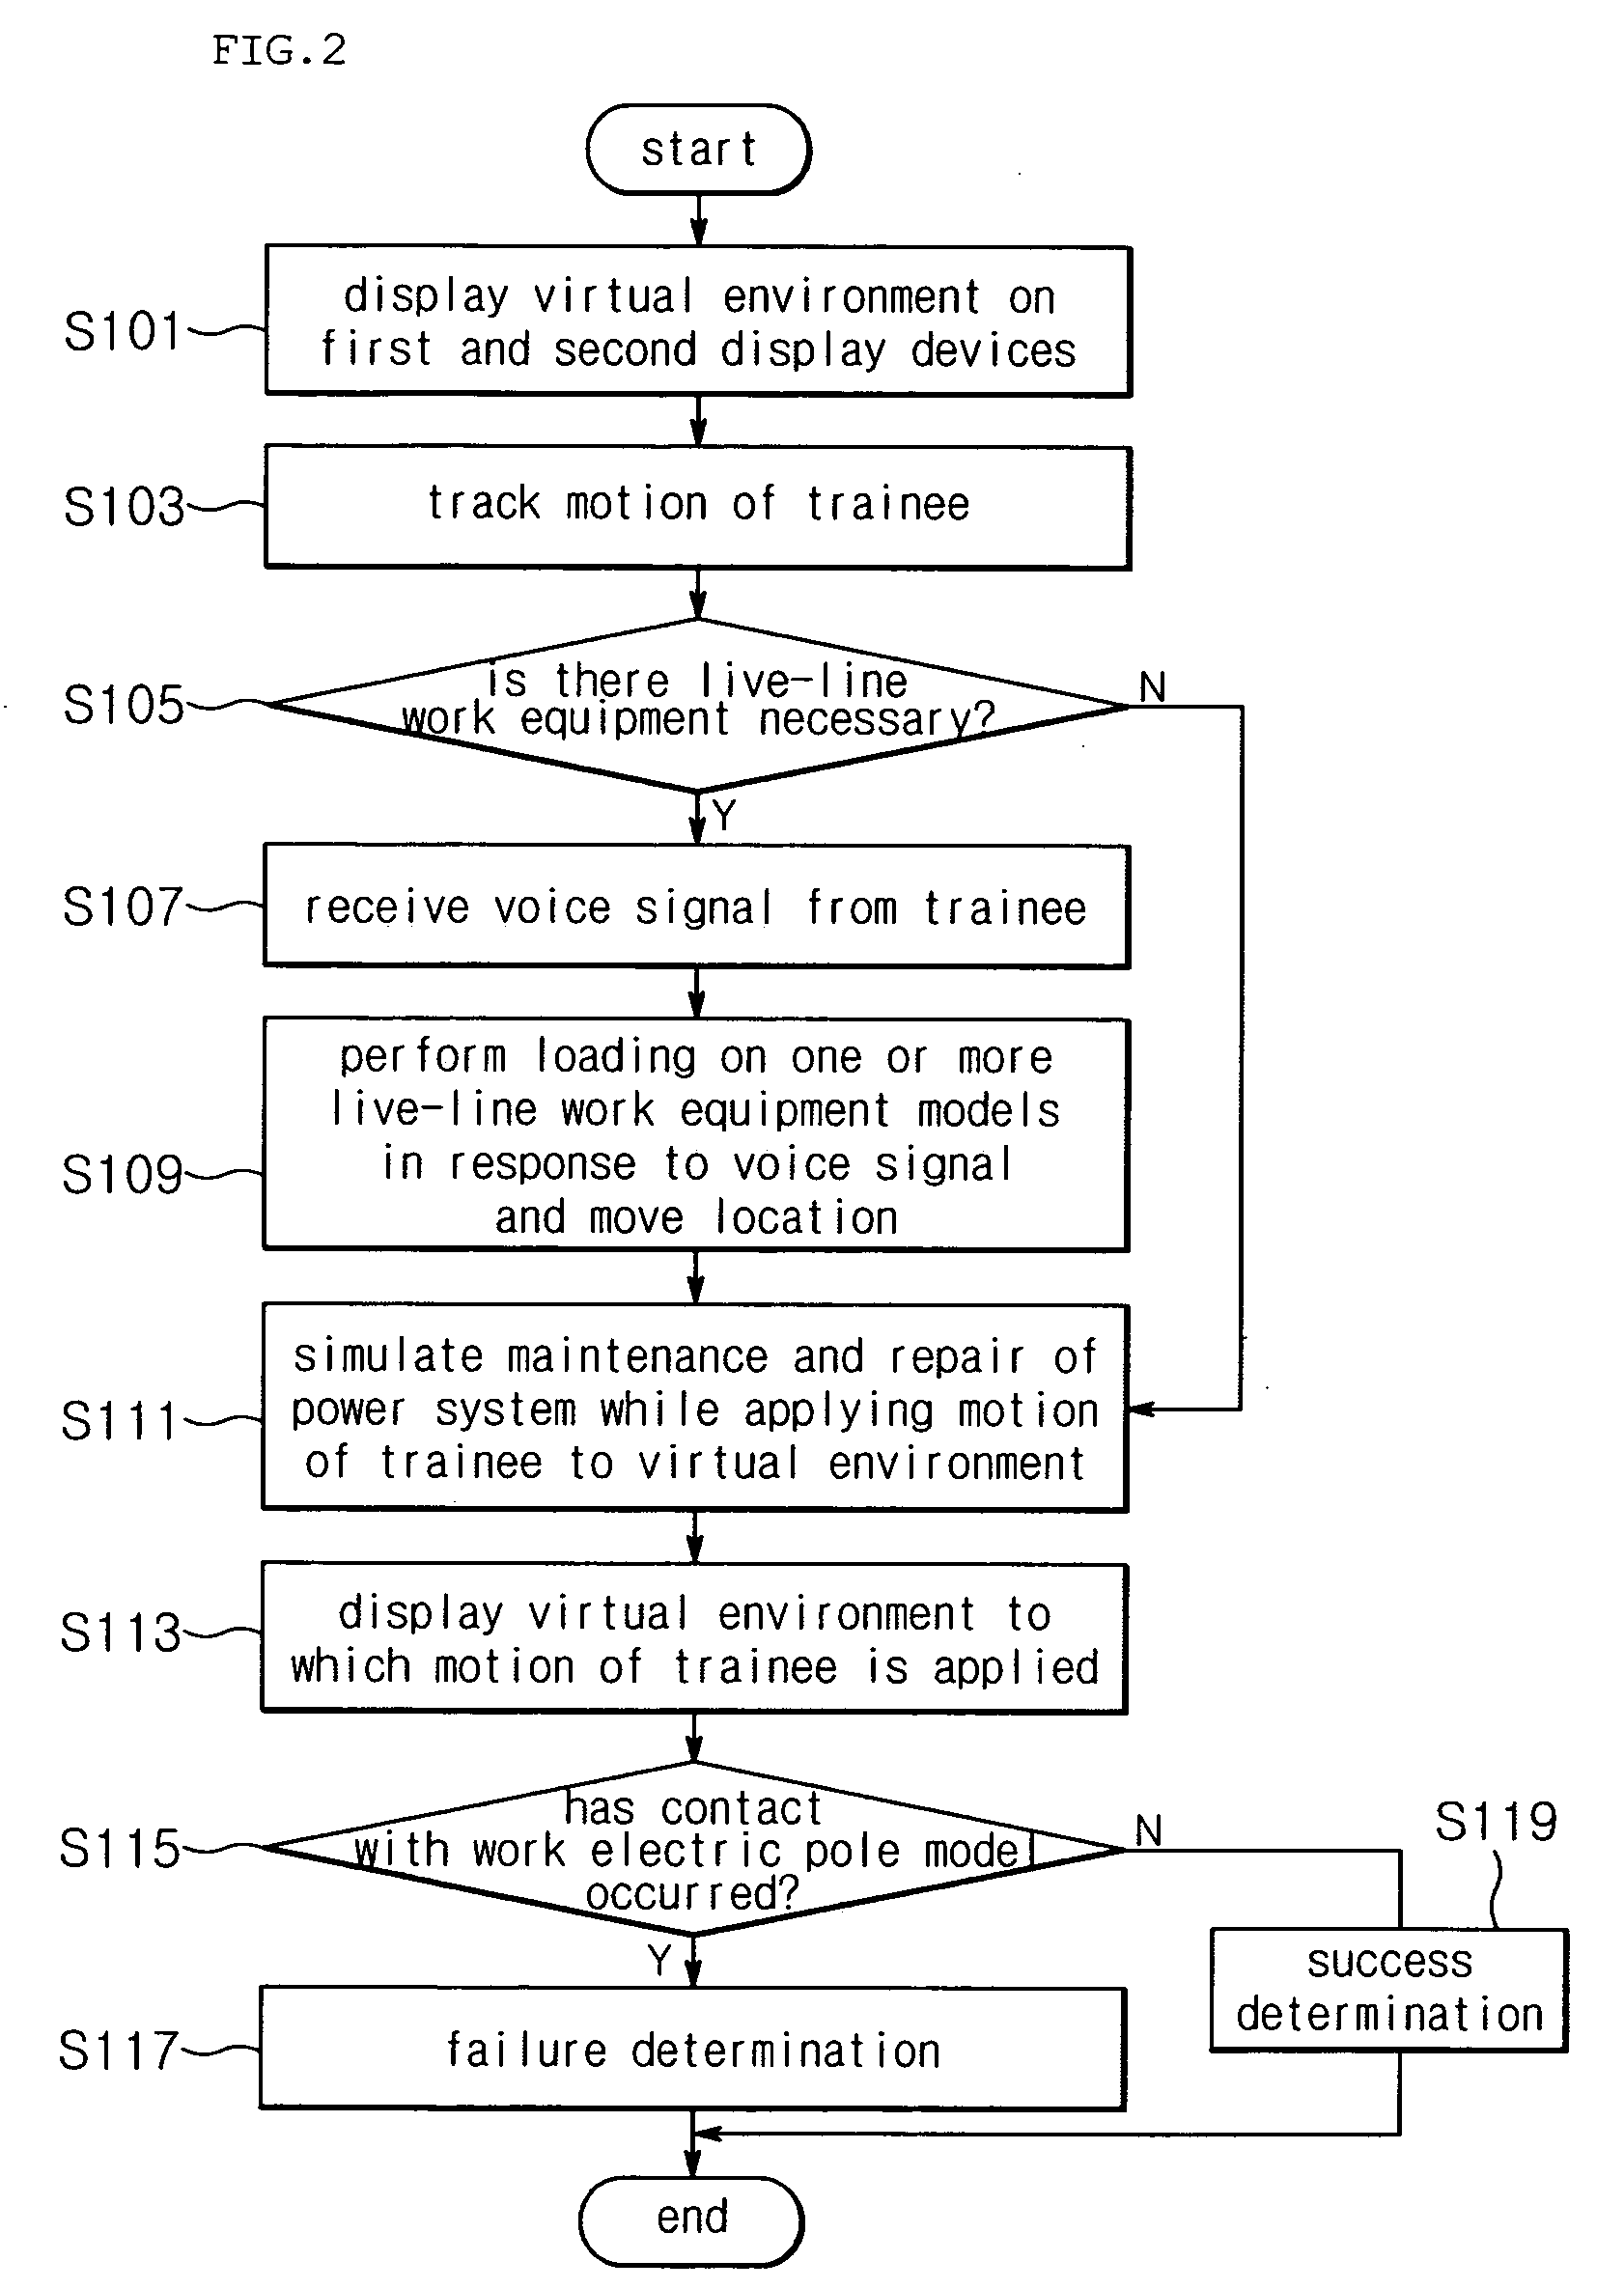 Immersion-type live-line work training system and method